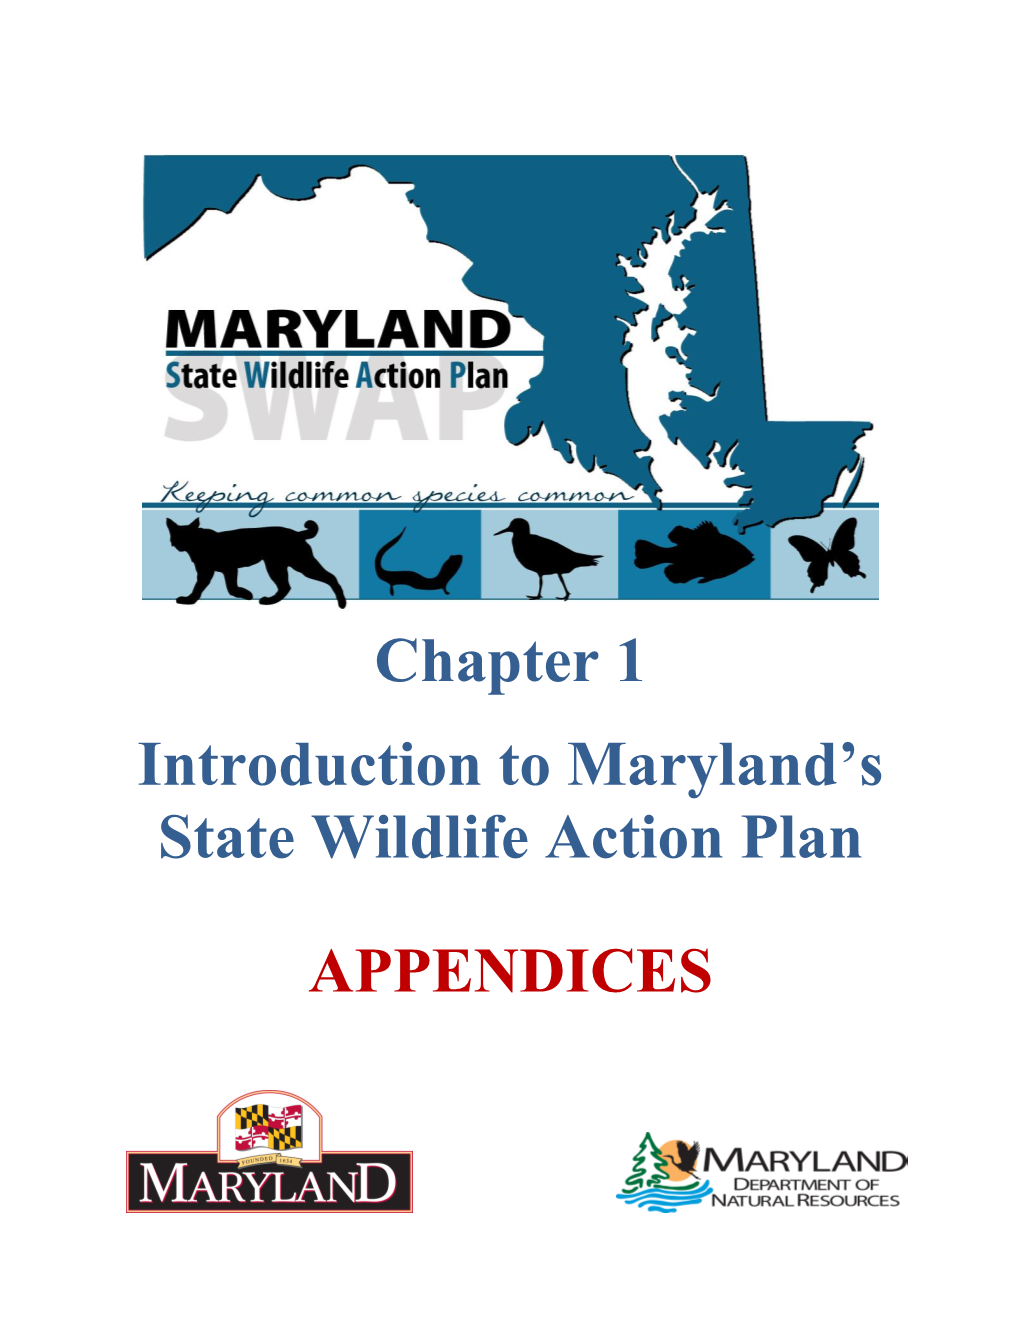 Chapter 1 Introduction to Maryland's State Wildlife Action Plan